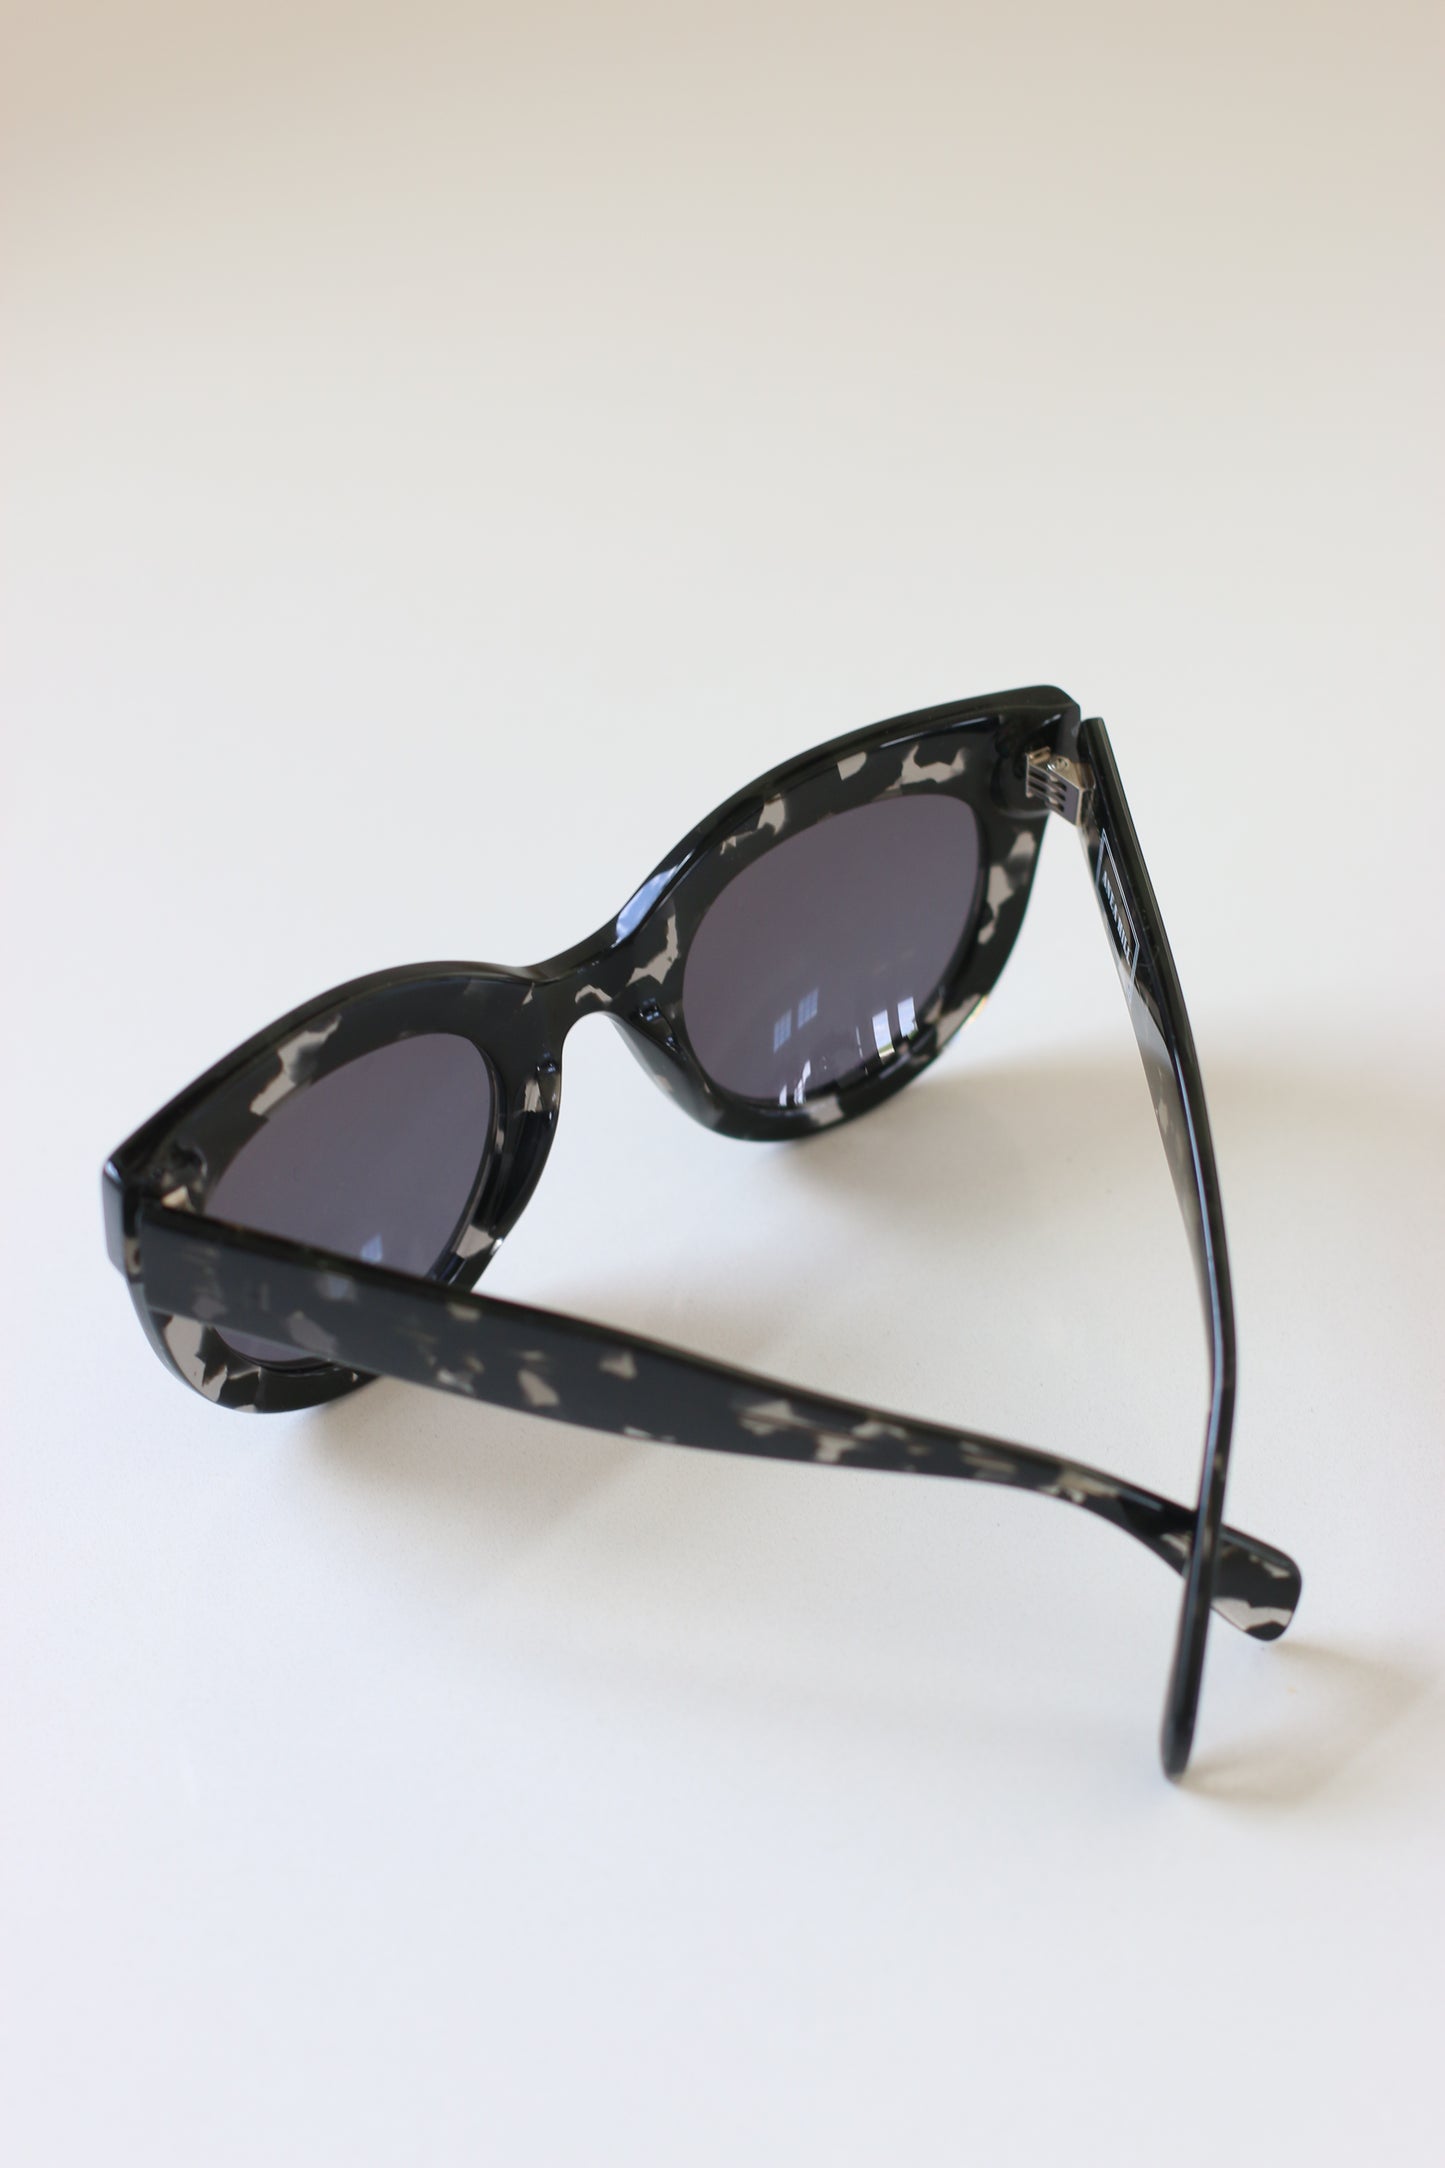 Close-up of ANEA HILL Dynasty sunglasses, highlighting the silver-tone hinges